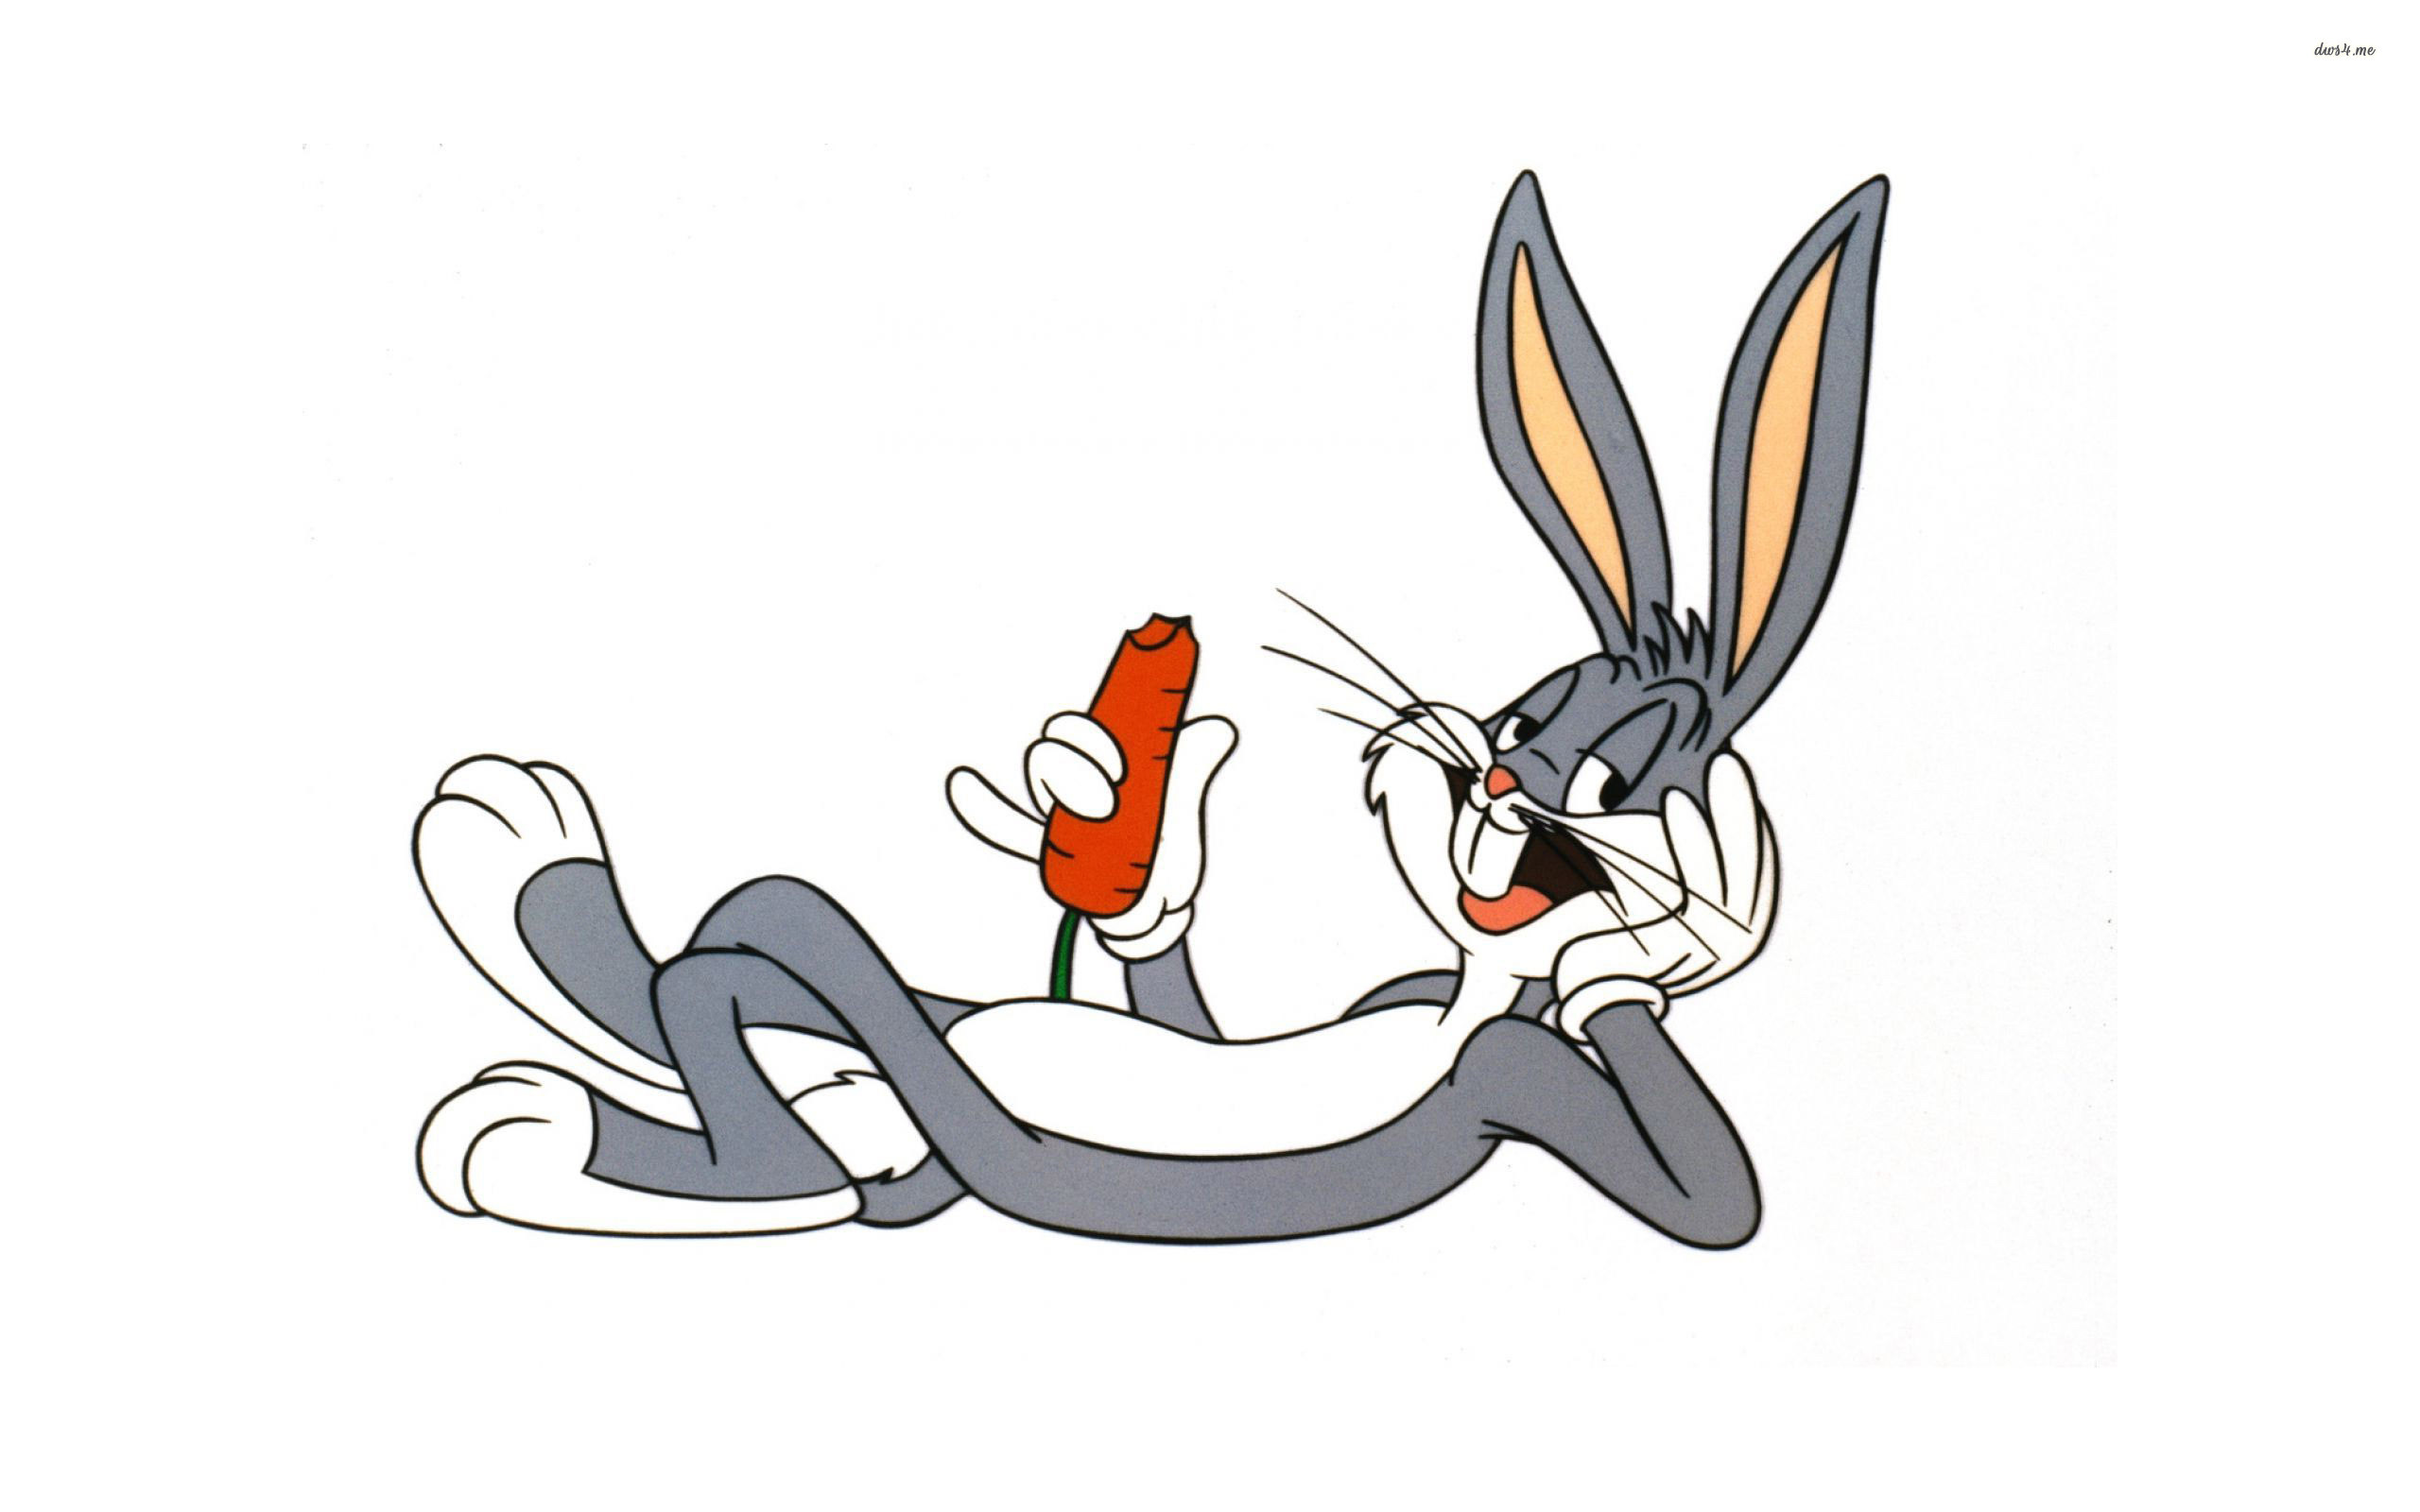 January 27, 2016 Bugs Bunny Wallpapers, px